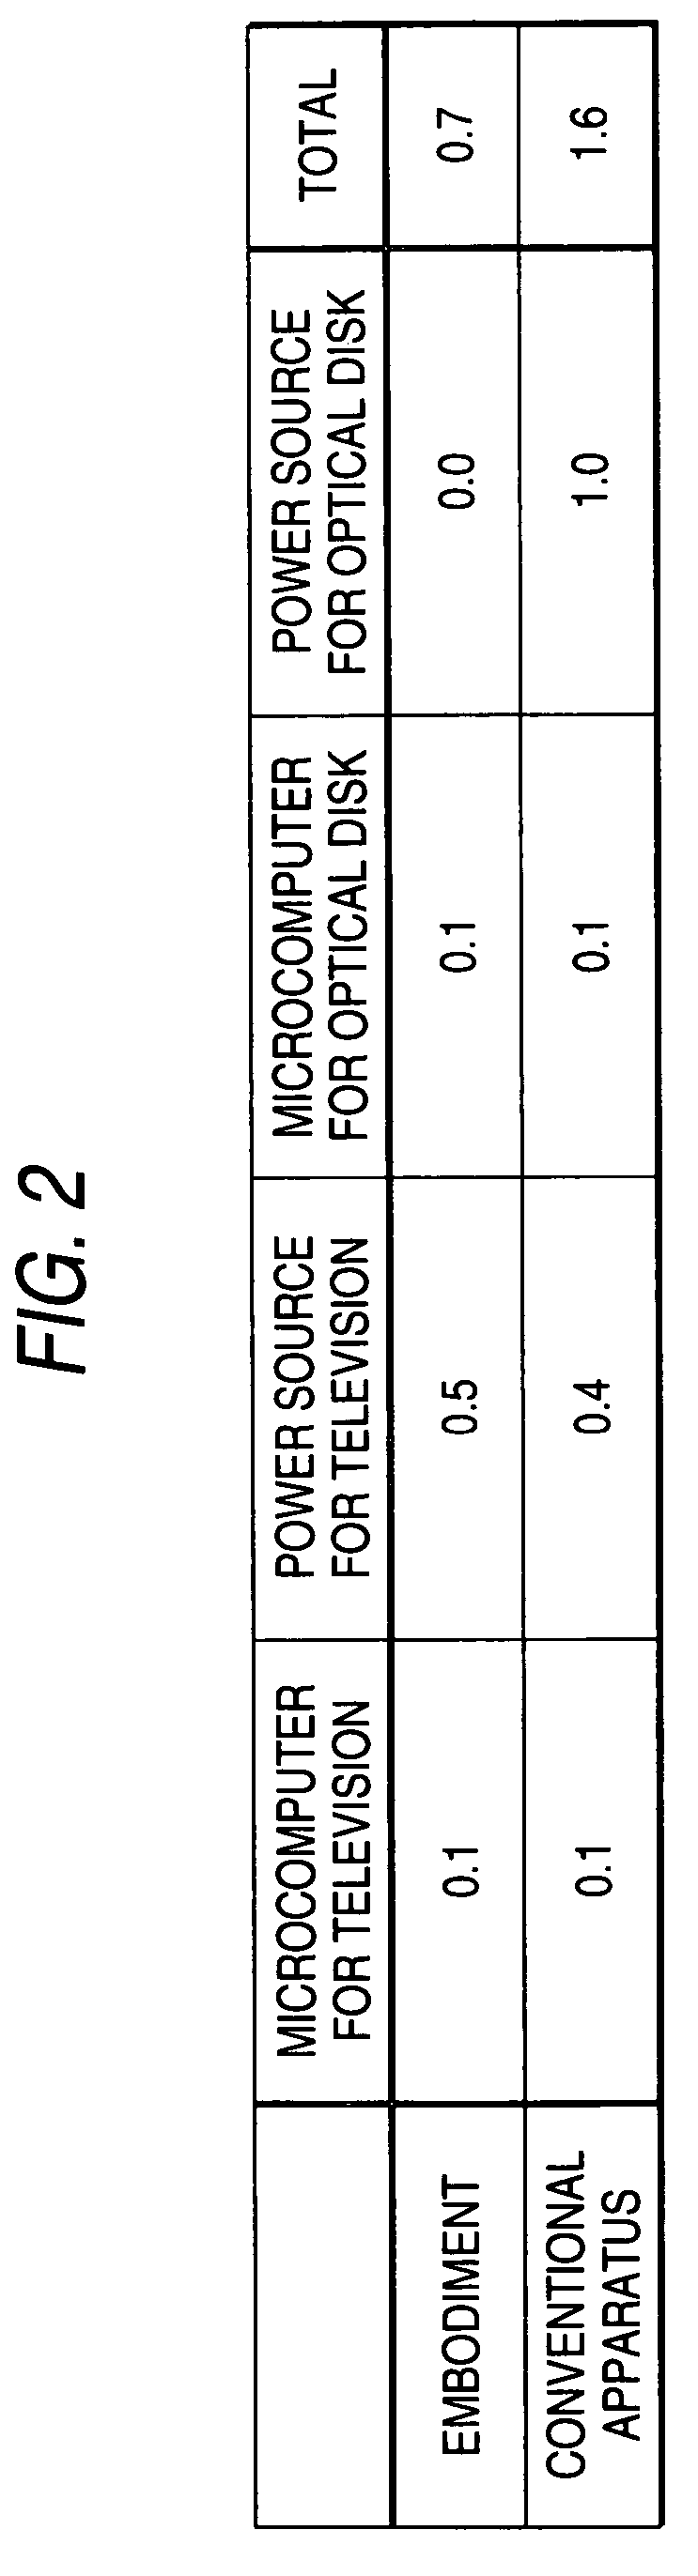 Television apparatus embedded with optical disk device